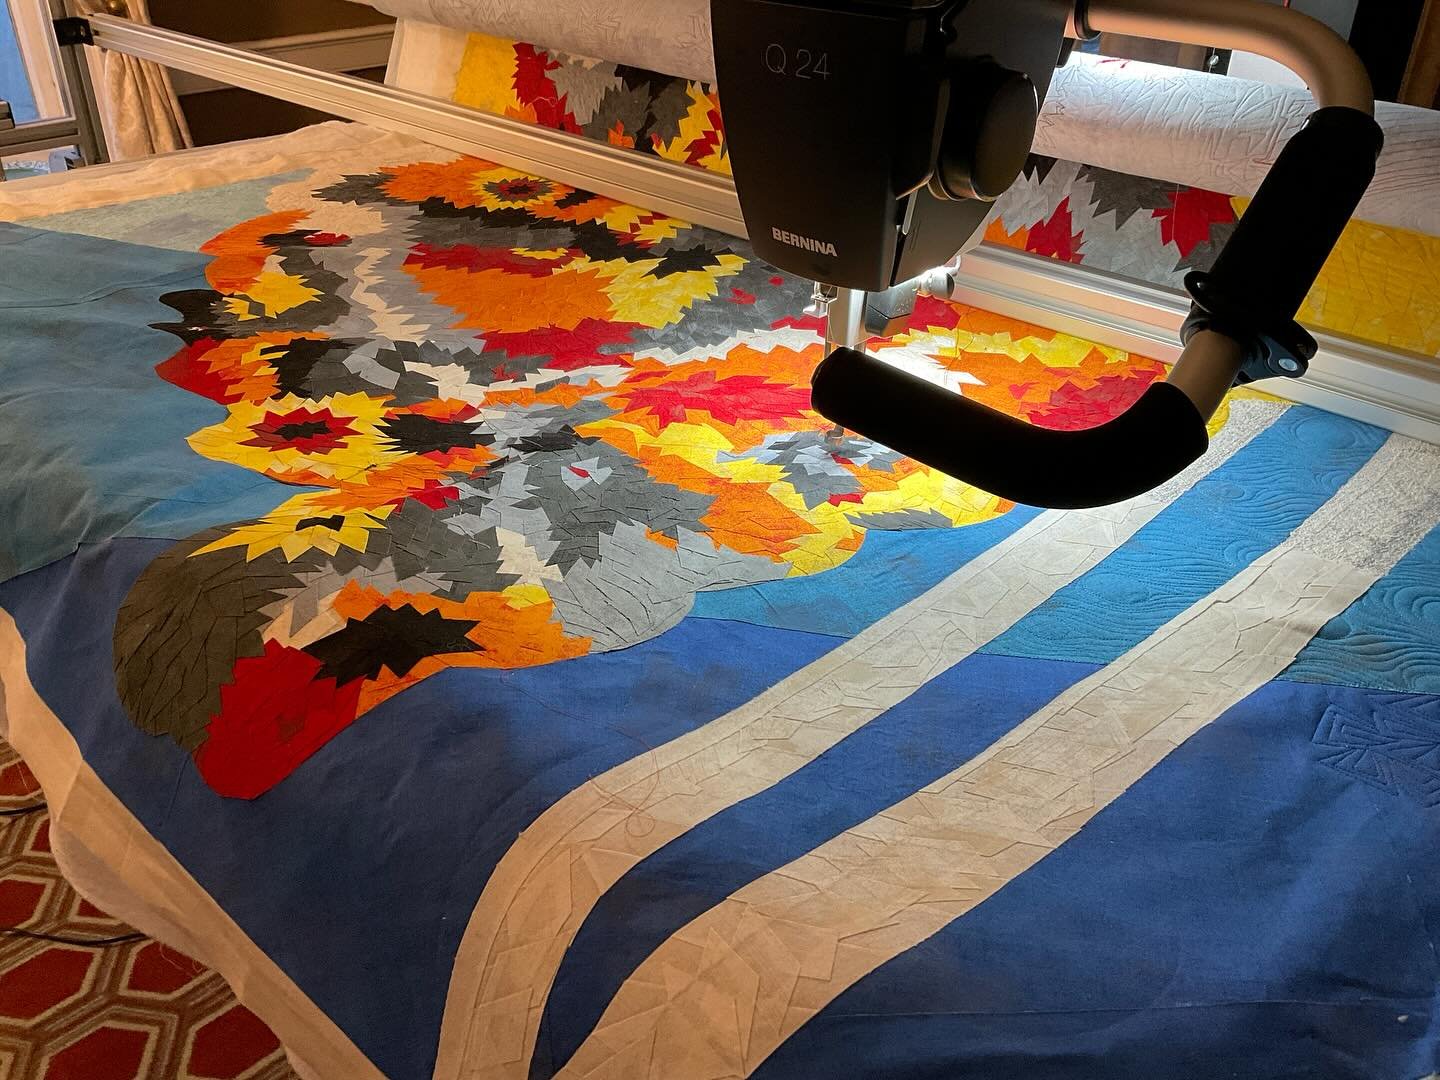 I&rsquo;m beyond the halfway mark on this explosive quilt by @cookies.and.quilts - I can&rsquo;t wait to see this completed. It&rsquo;s an amazing piece. 

#artquilting #longarmquilting